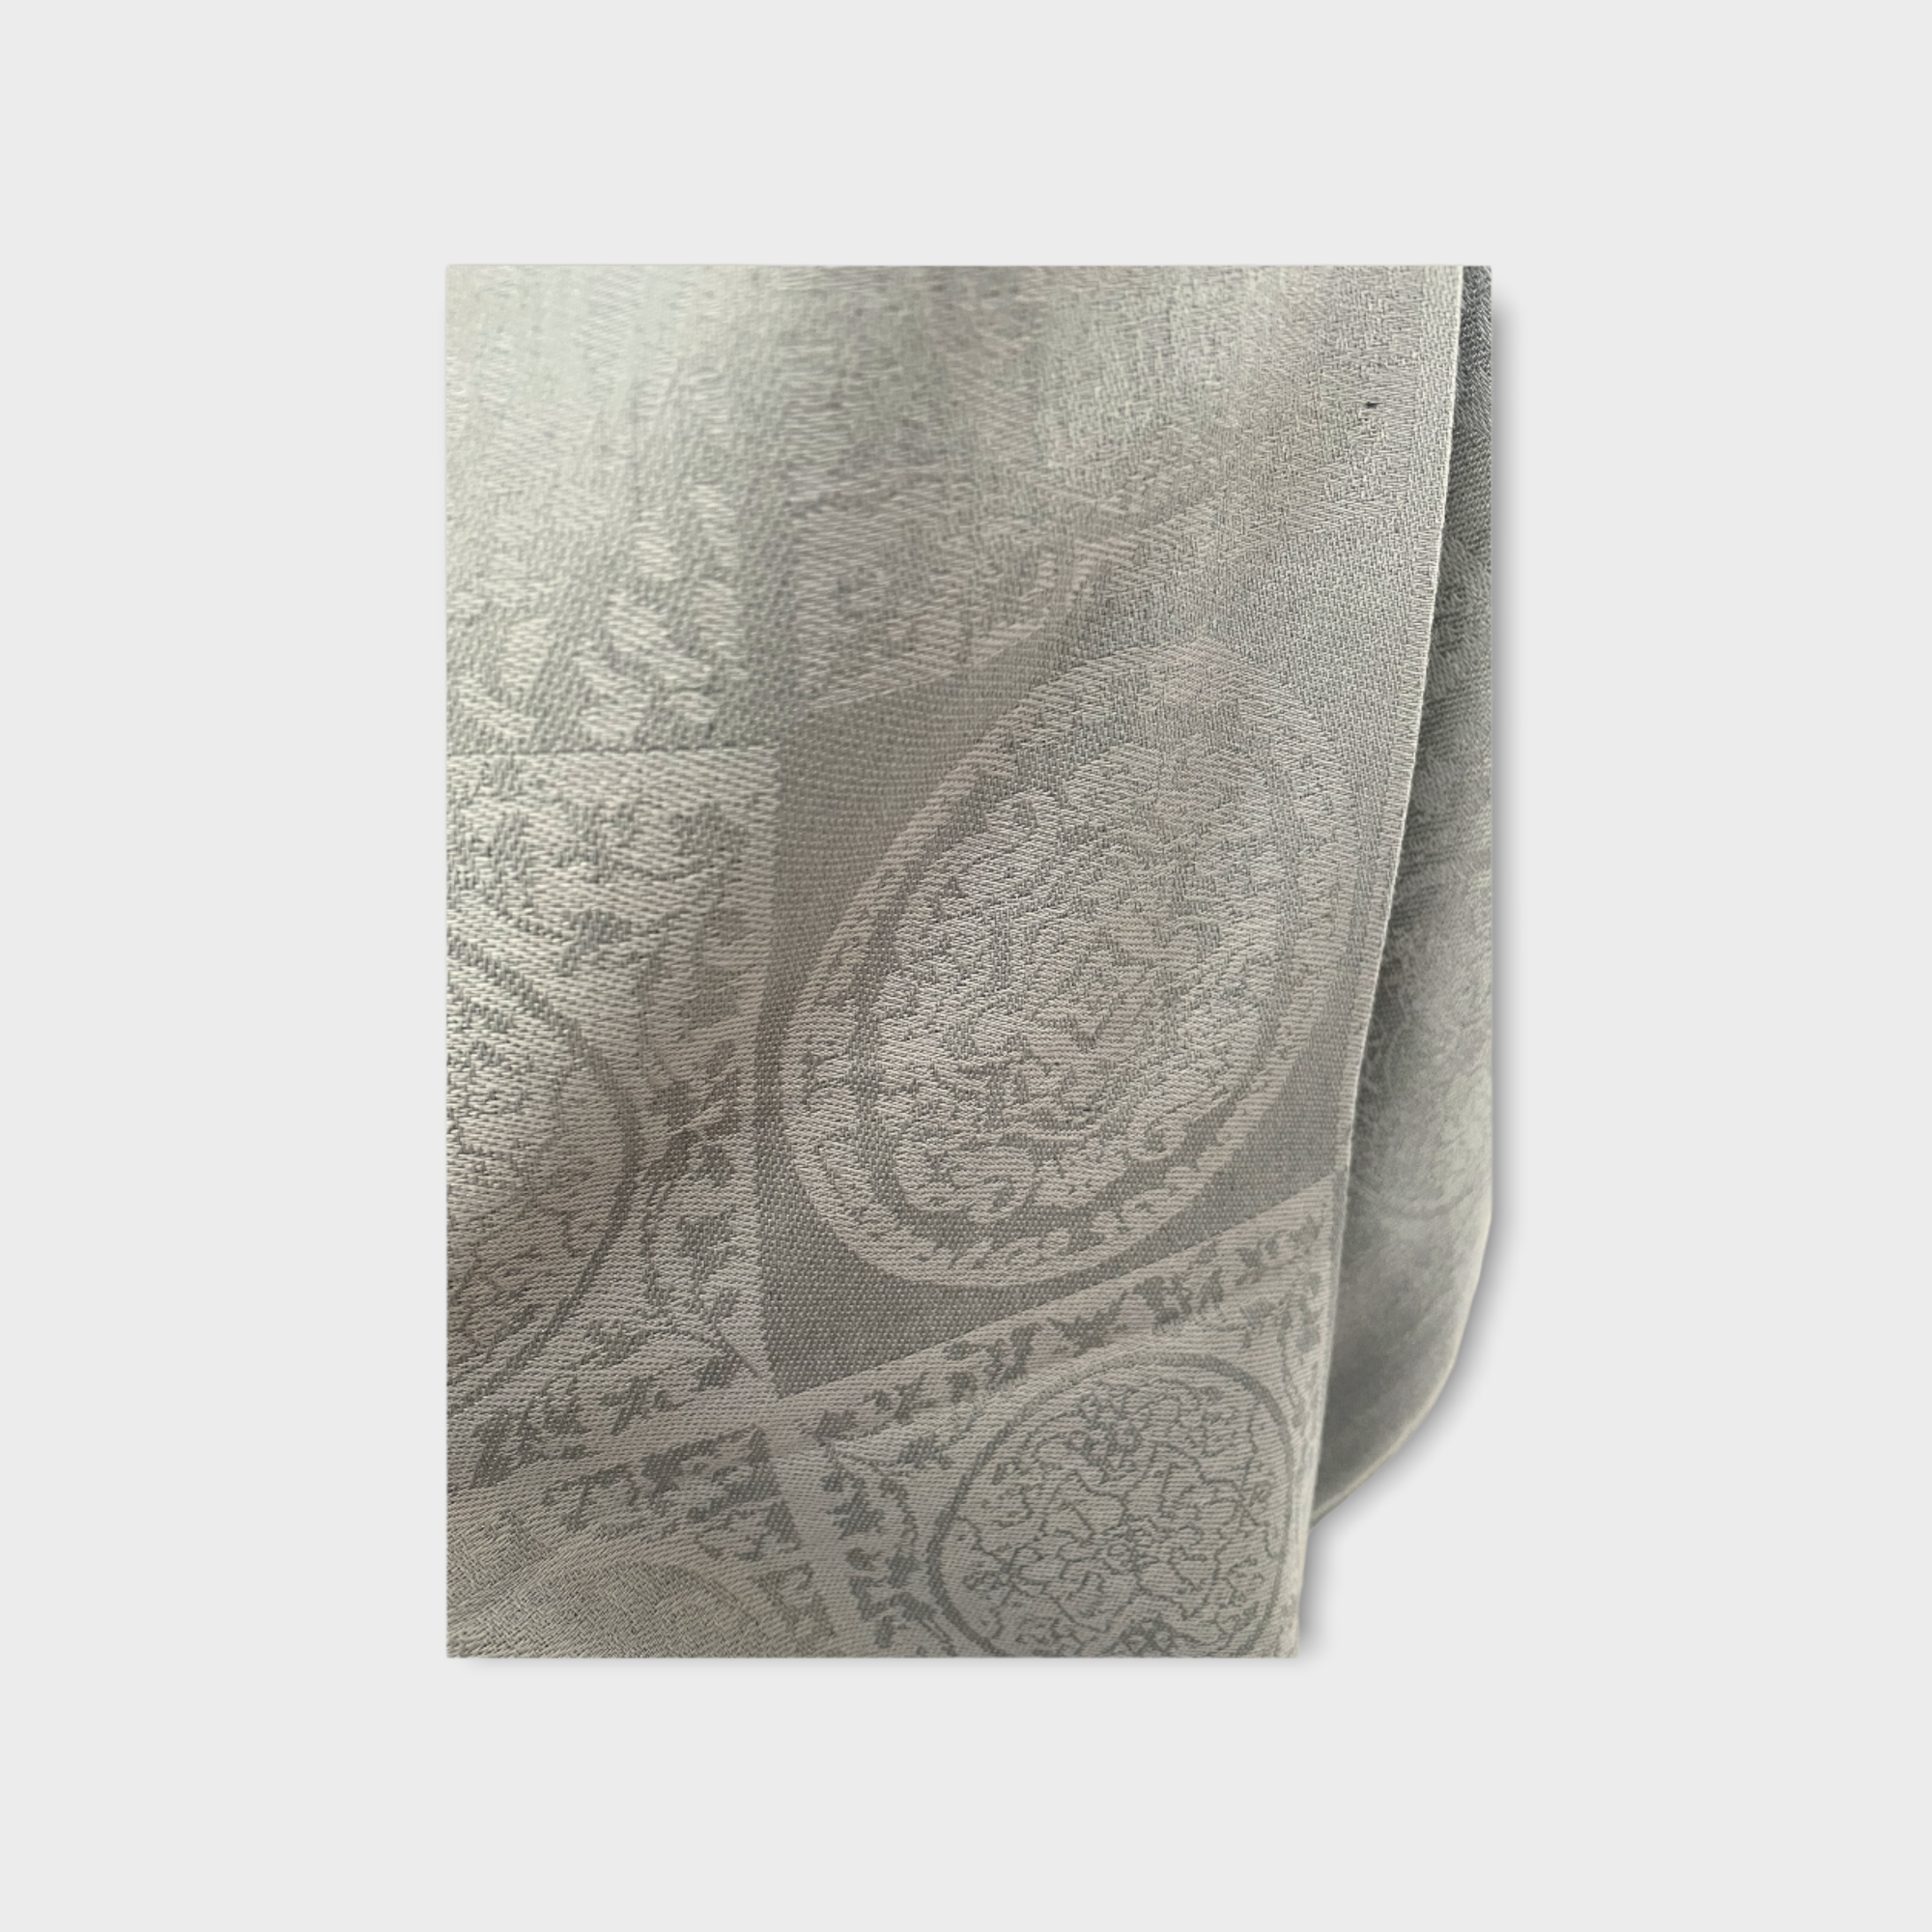 Pashima scarves from the Philippines CIRCLE silver